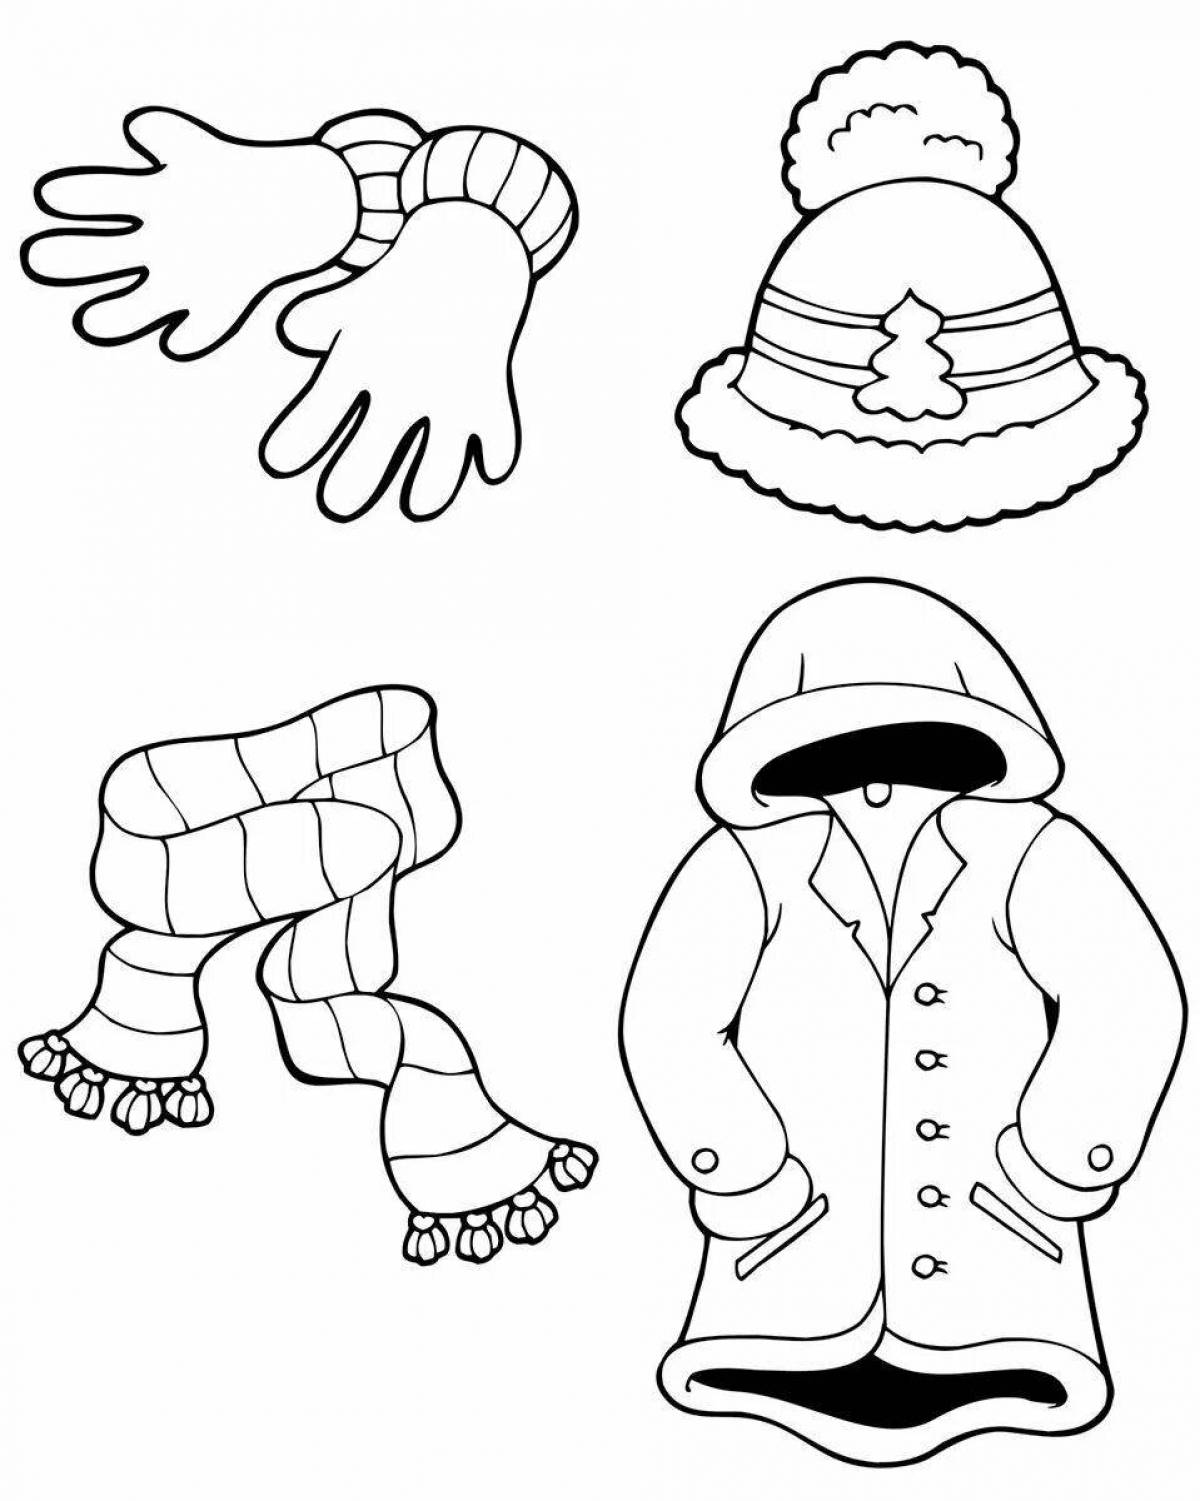 Kimder page fun coloring page